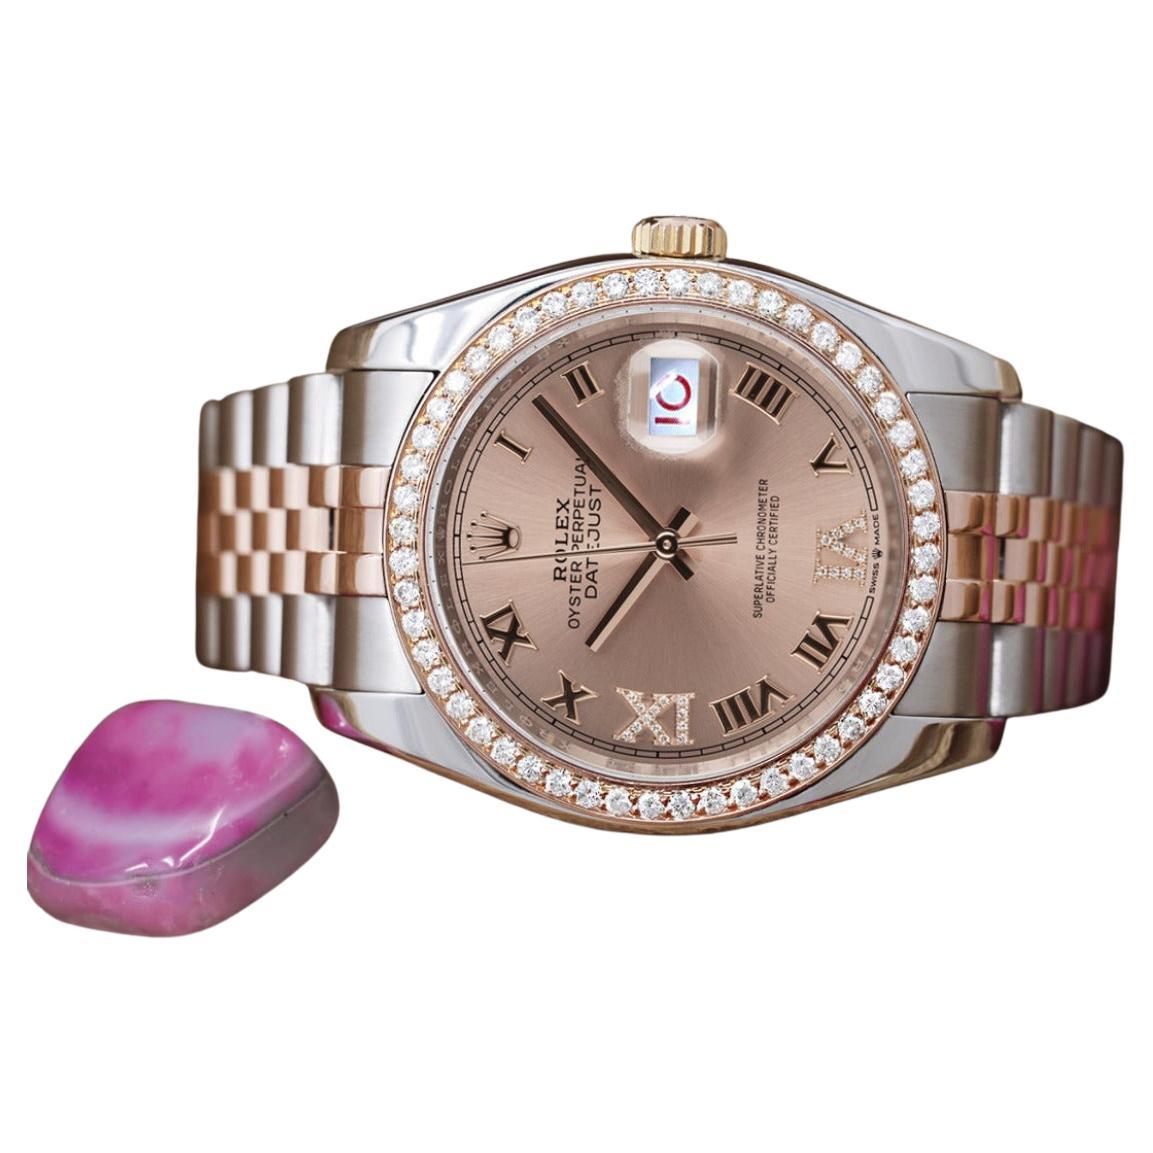 Rolex Datejust Two Tone SS and RG Watch Pink Roman Dial Diamond Bezel 116261 For Sale